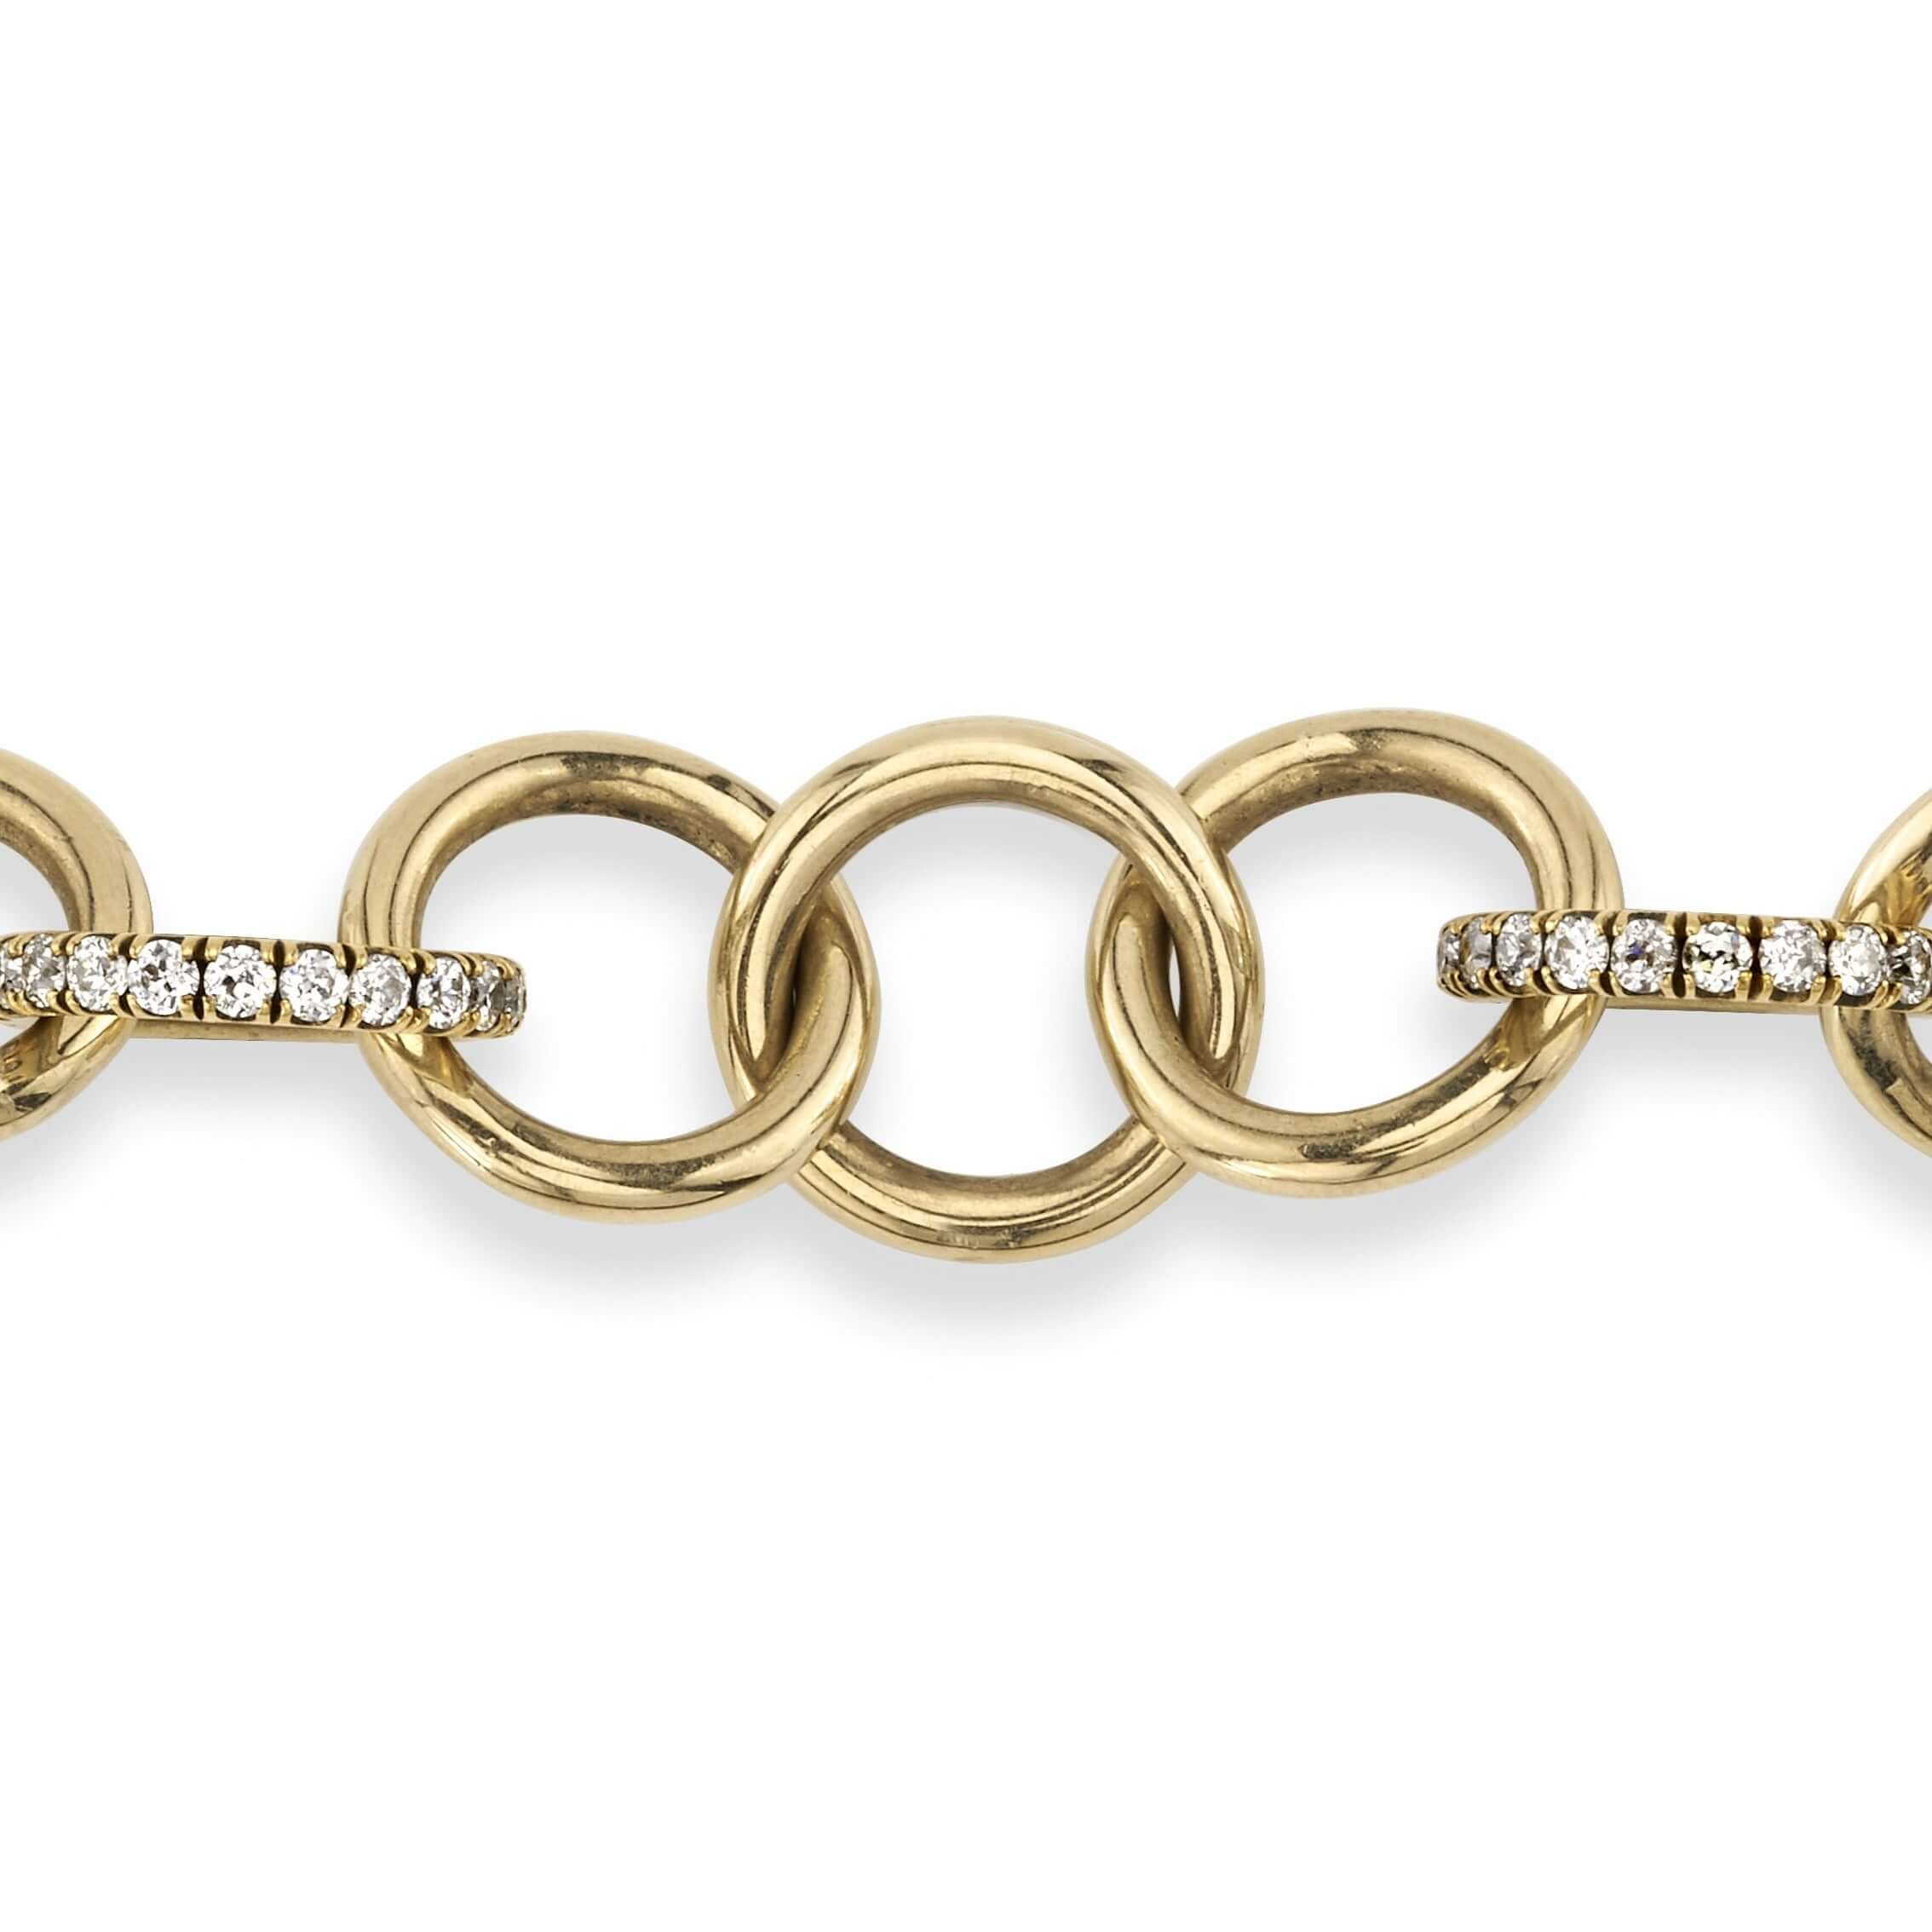 SINGLE STONE CLUB BRACELET WITH DIAMONDS featuring Handcrafted 18K yellow gold club bracelet with approximately 1.60ctw G-H/VS old European cut diamonds. Bracelet measures 7.5".